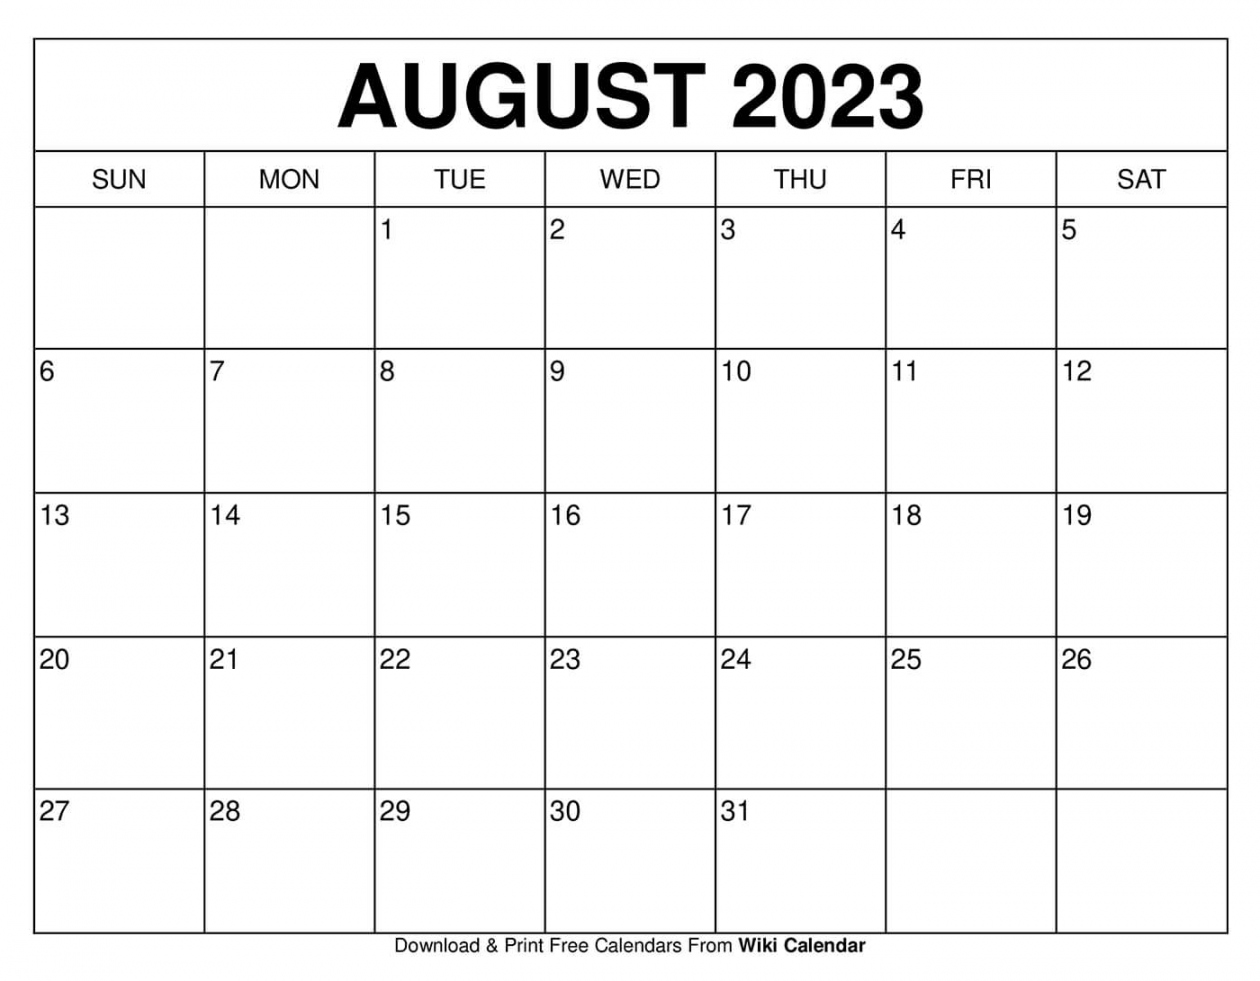 Free Printable August  Calendar Templates With Holidays - FREE Printables - Free Printable August Calendar